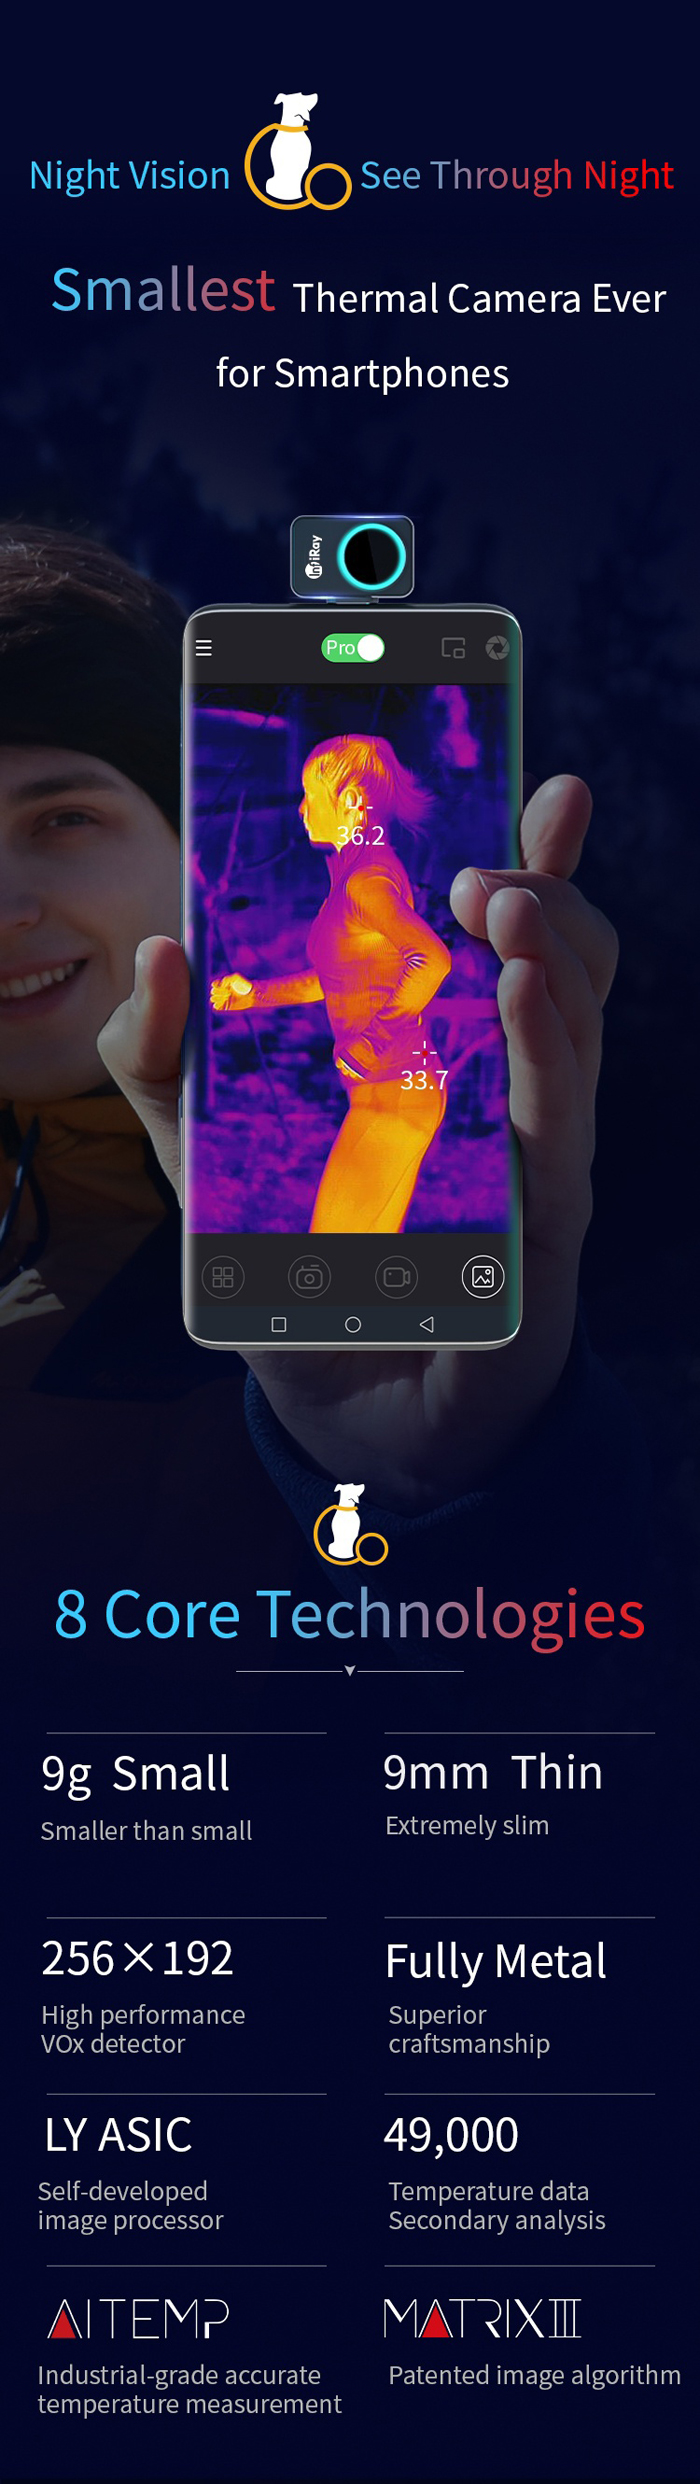 Rooms! The Smallest Thermal Camera For Smartphones Helps You Find Hidden Cameras